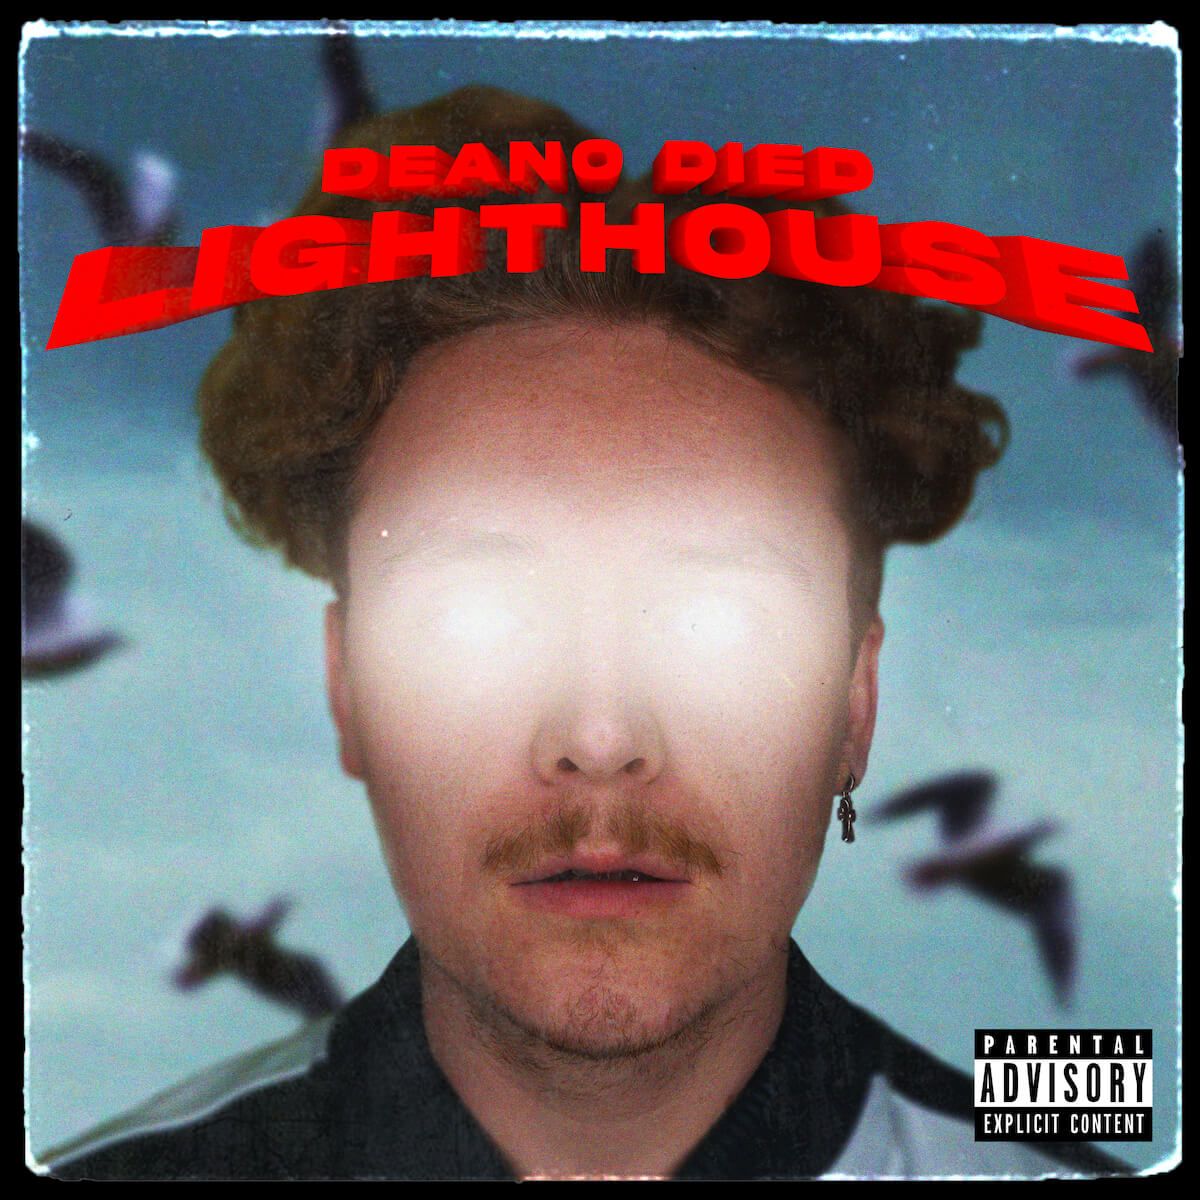 Deano-Died-artist-Lighthouse-single-cover